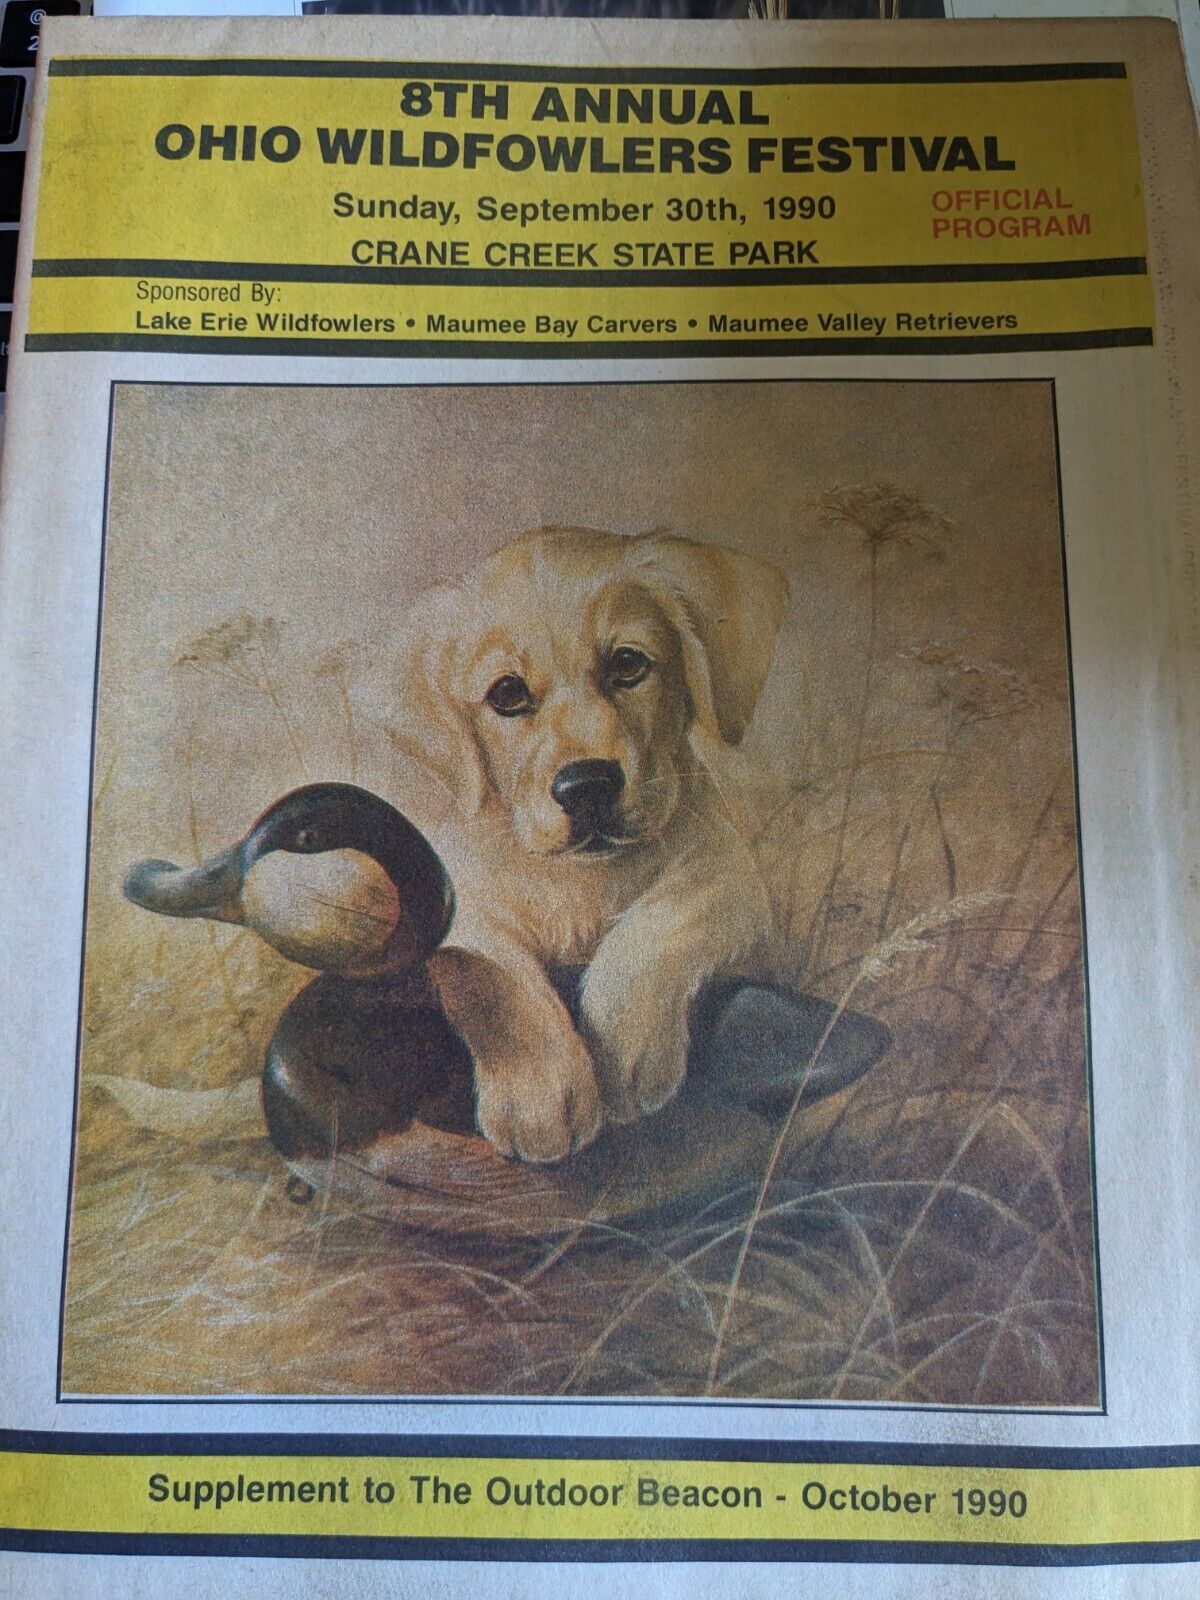 Vintage 1990 Official Program For The 8th Annual Ohio Wildfowlers Festival